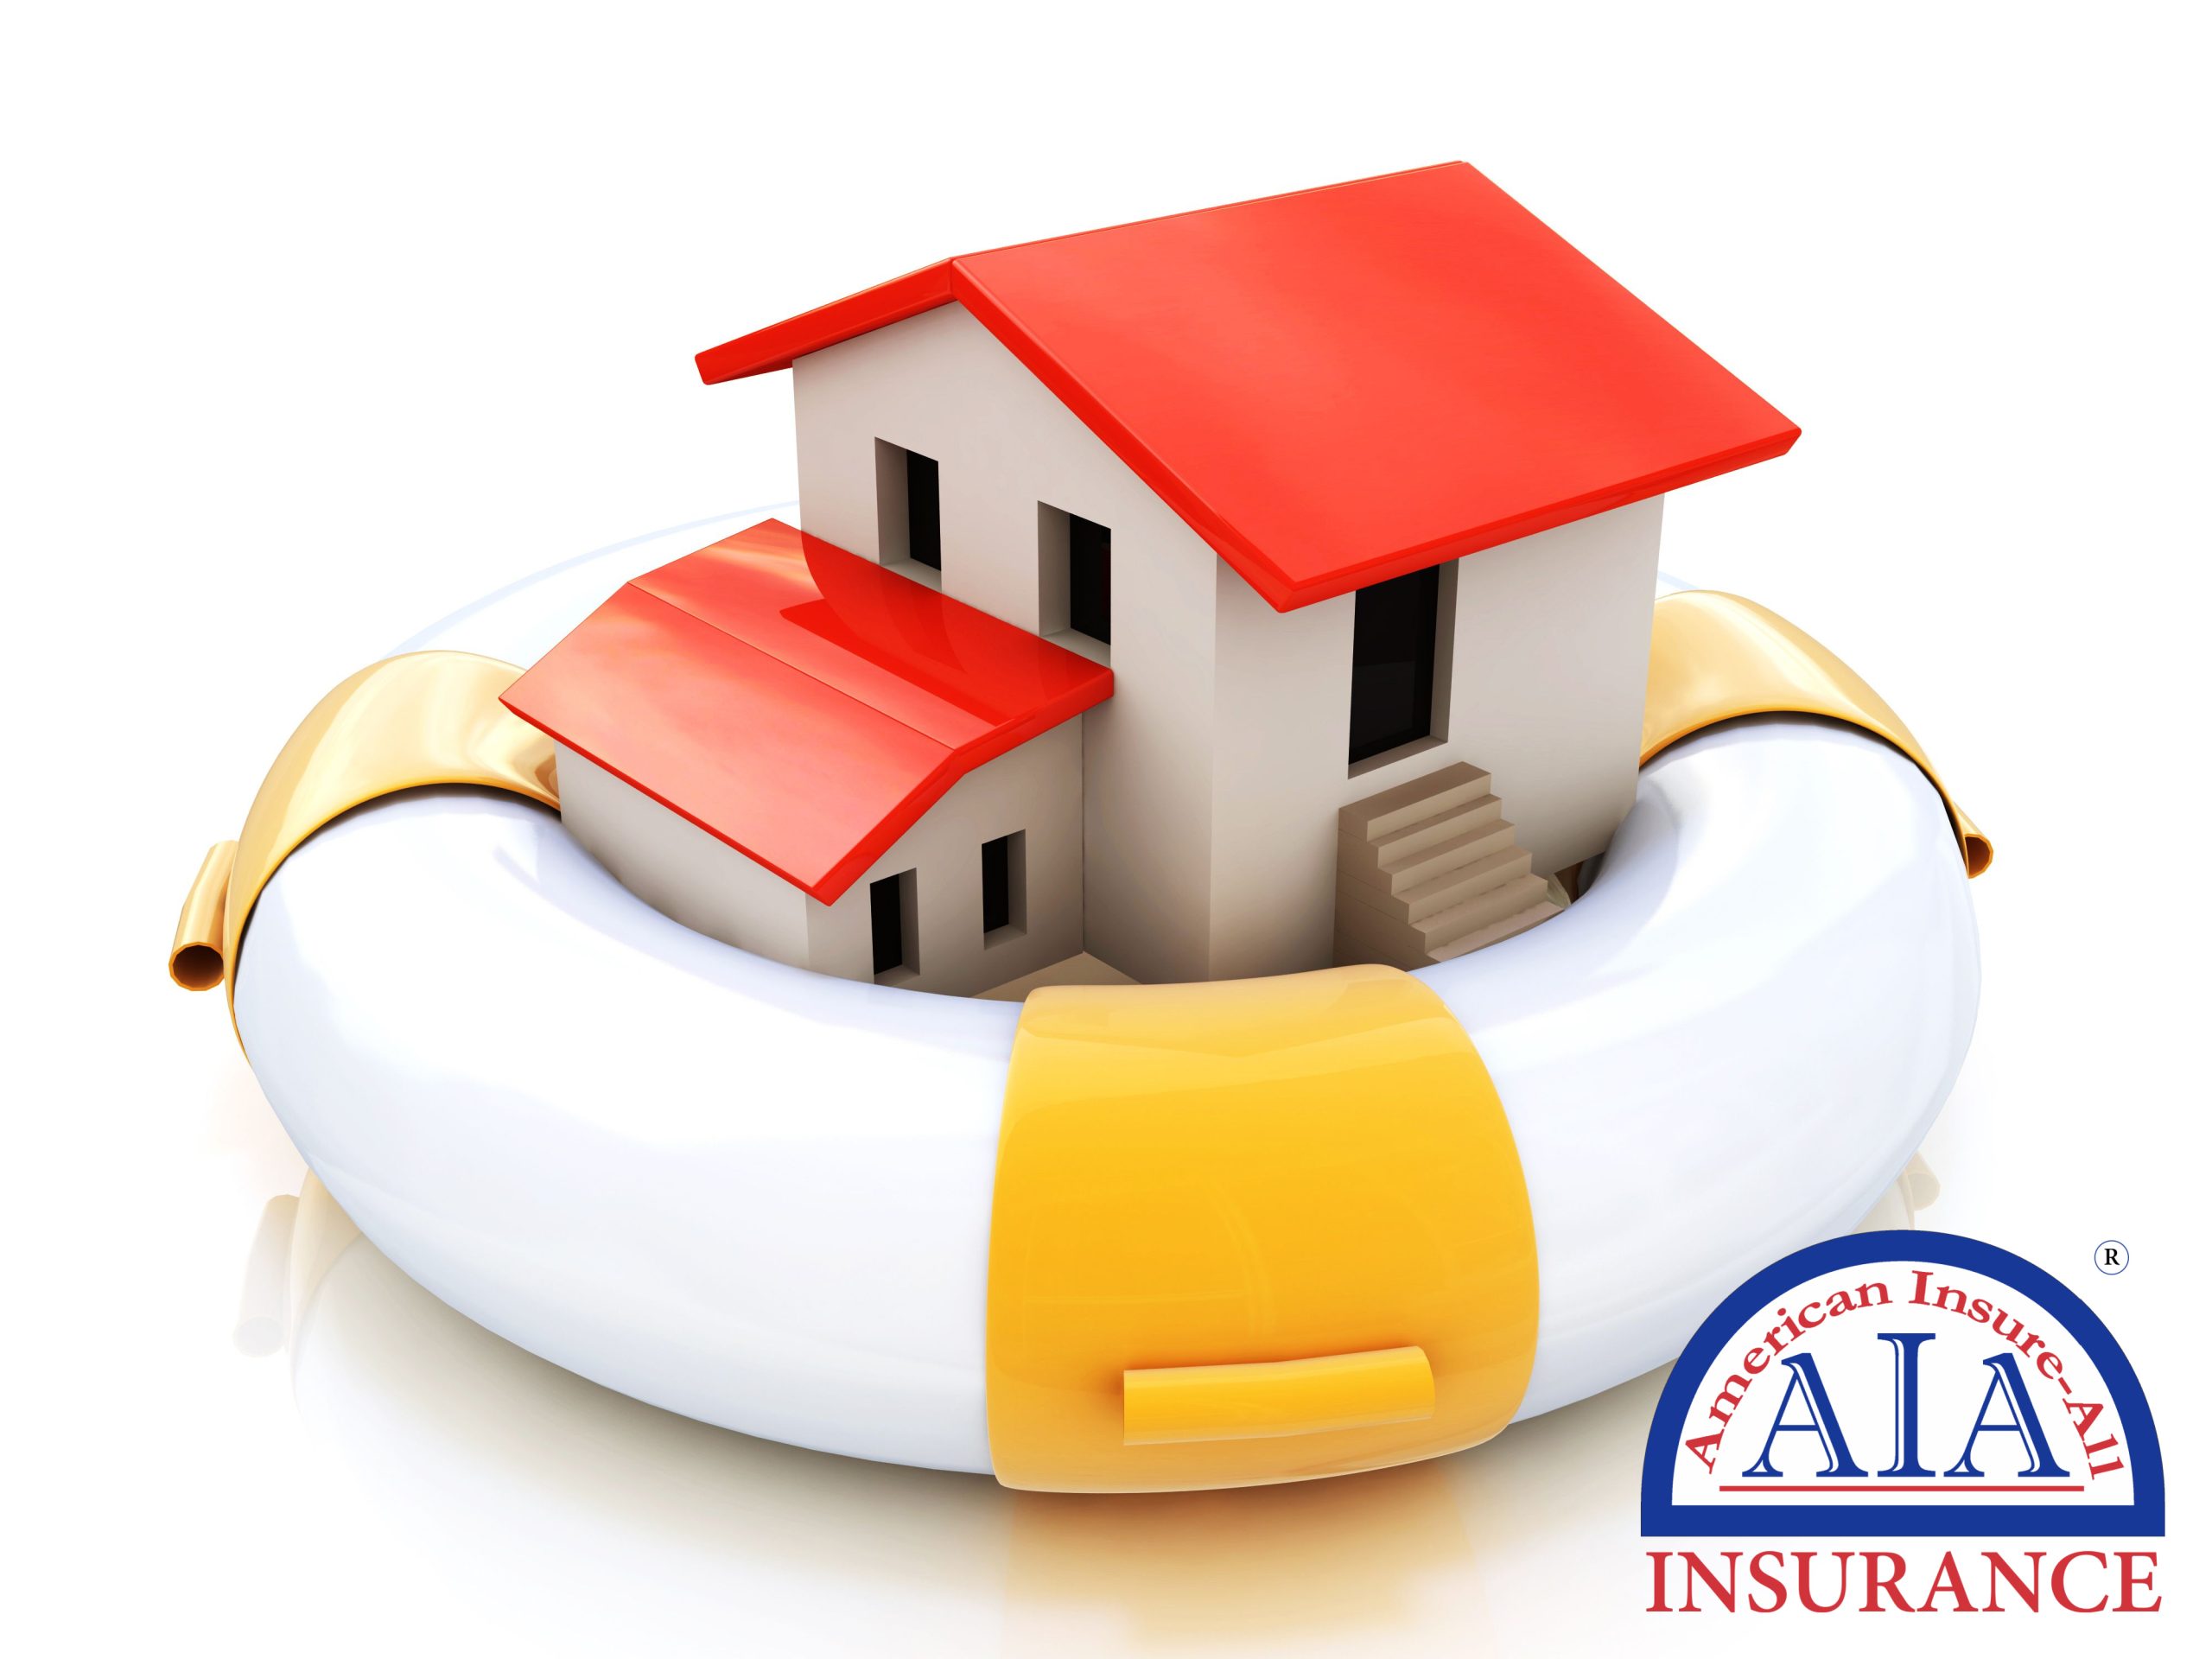 The Best Homeowners’ Insurance Begins and Ends with American Insure-All®!